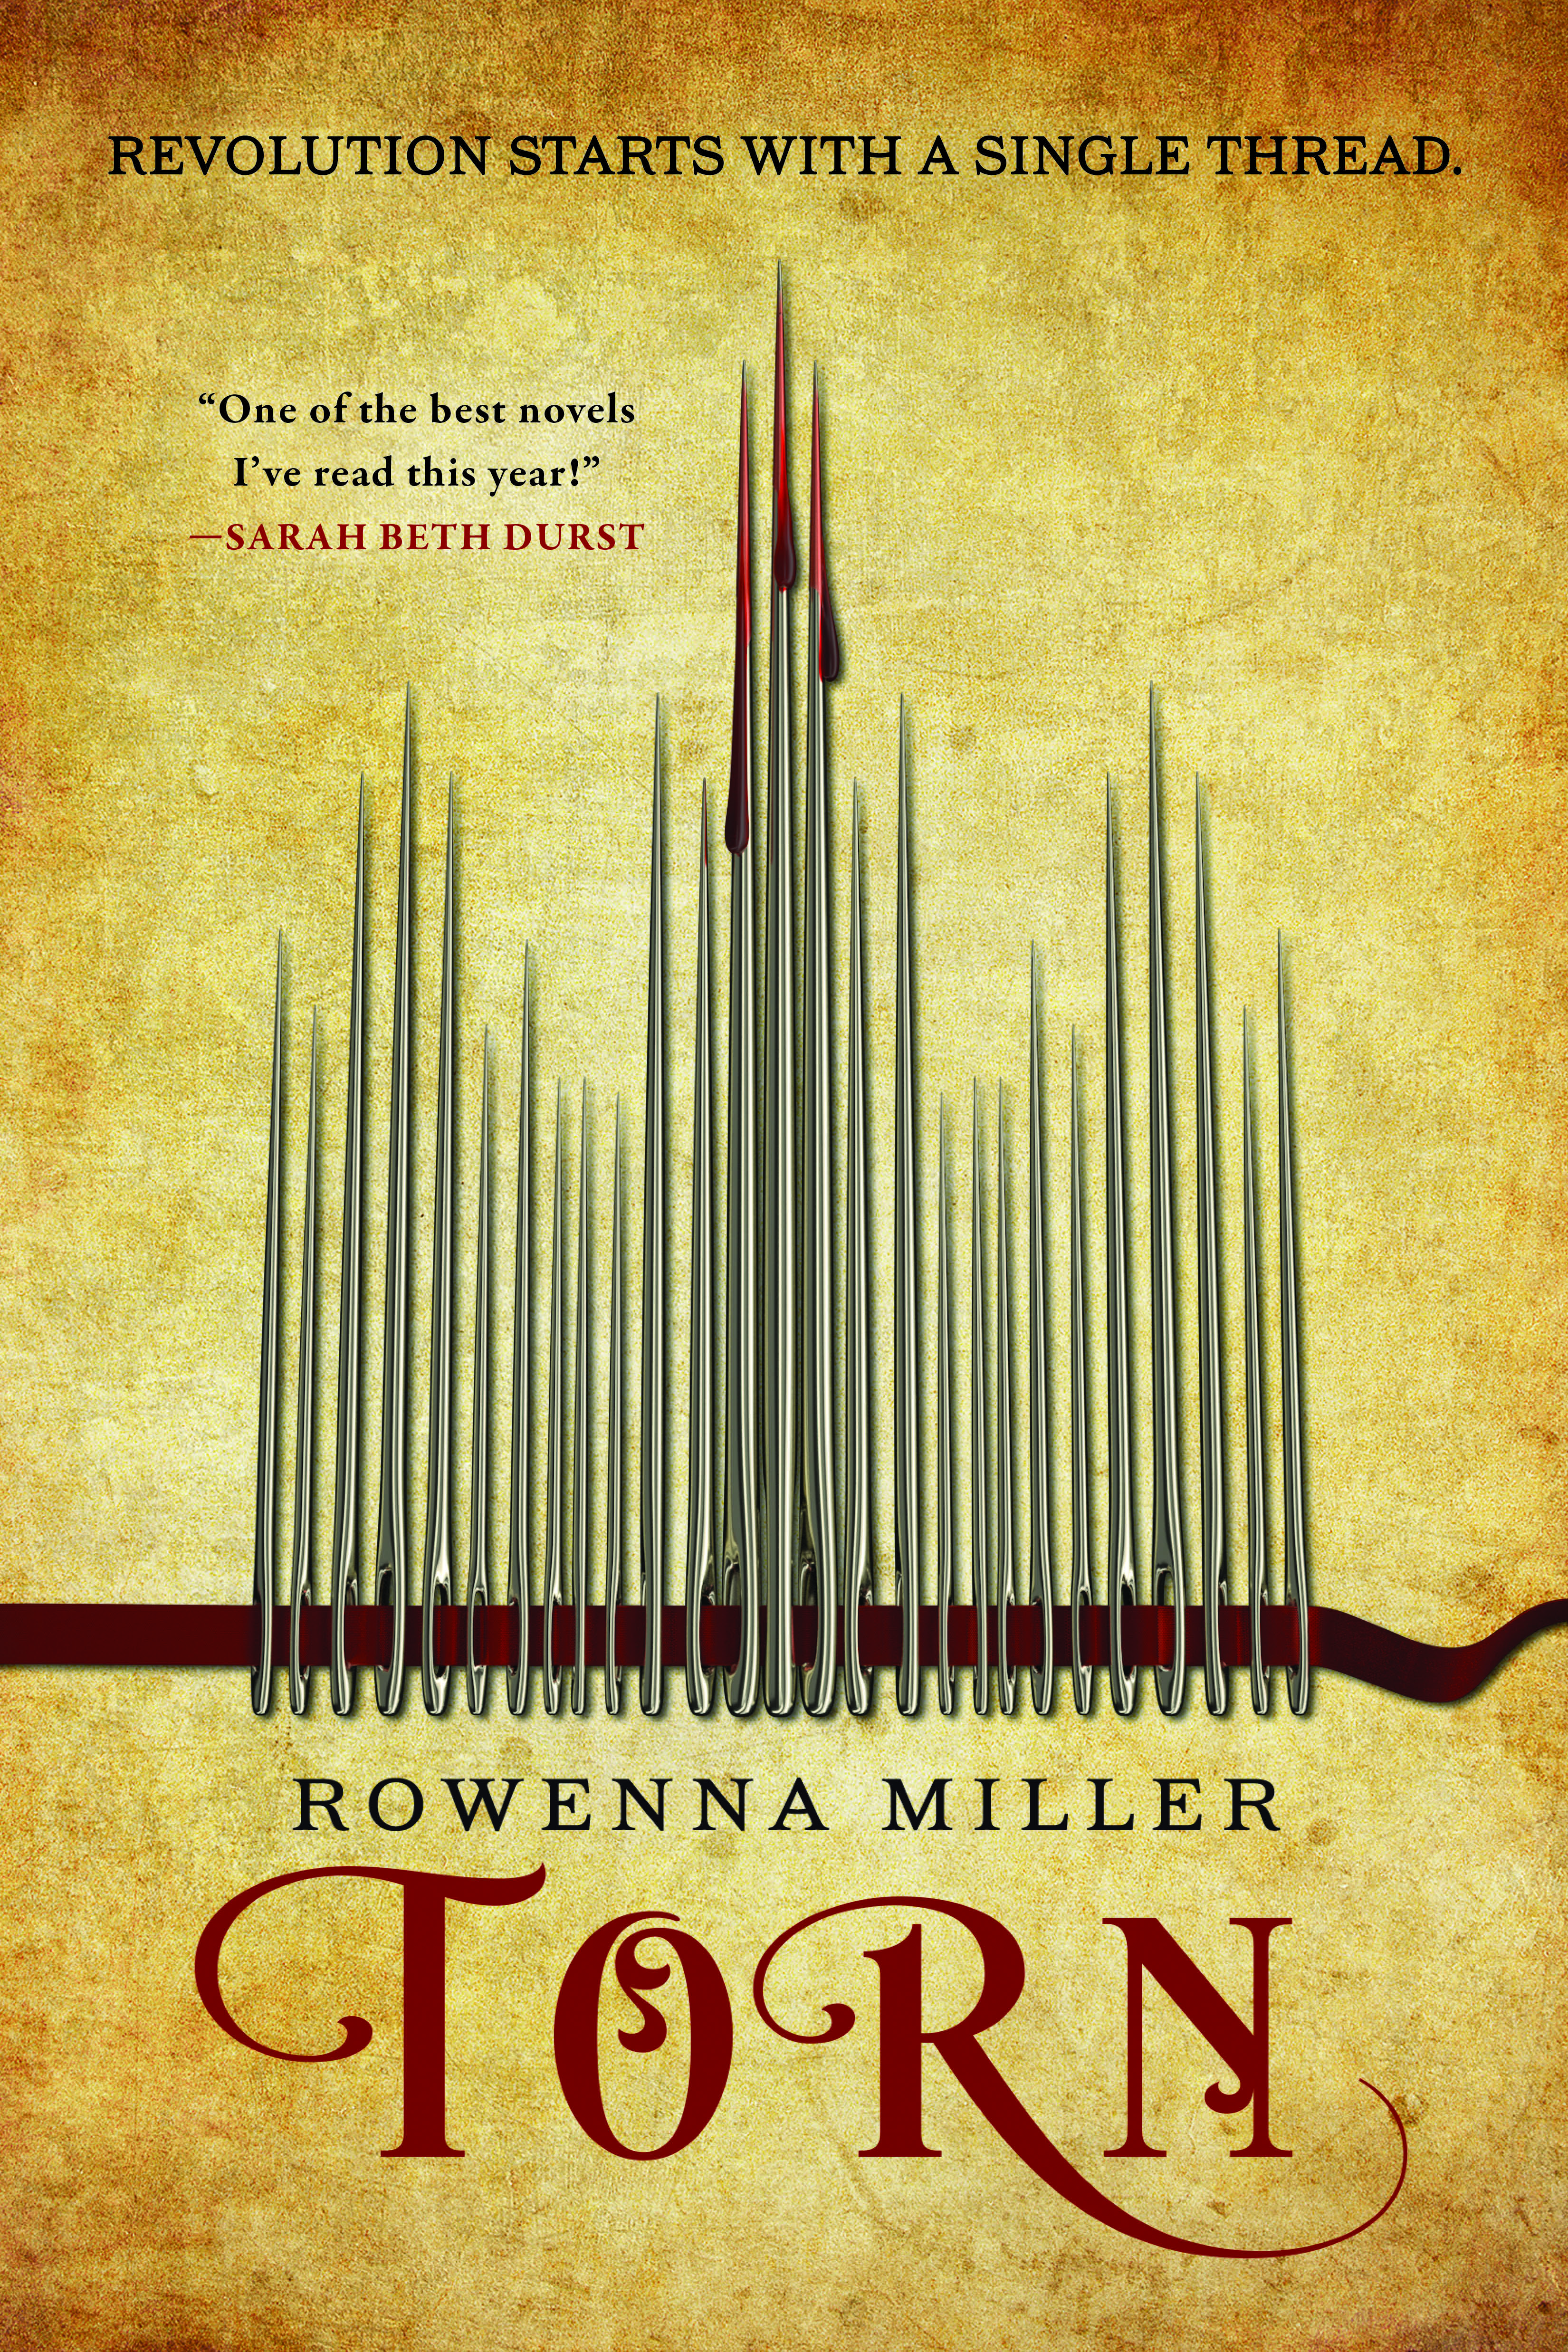 Book cover for Torn by Rowenna Miller. A line of needles are strung together with a red thread to form the silhouette of a city skyline. 